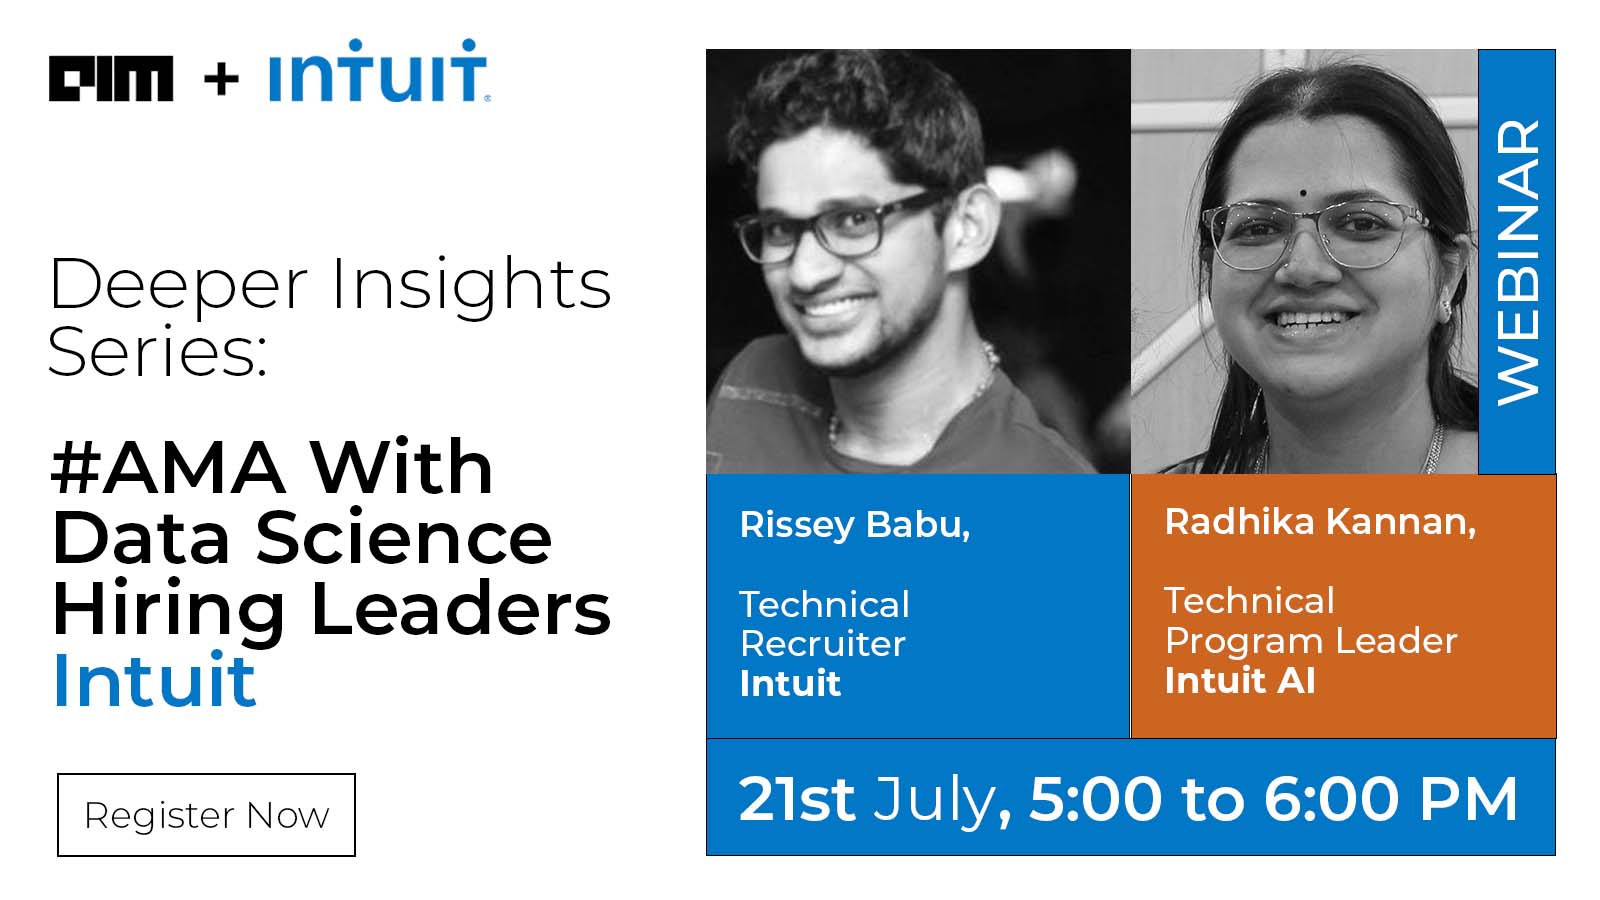 Deeper Insights Series: #AMA with Data Science Hiring Leaders from Intuit